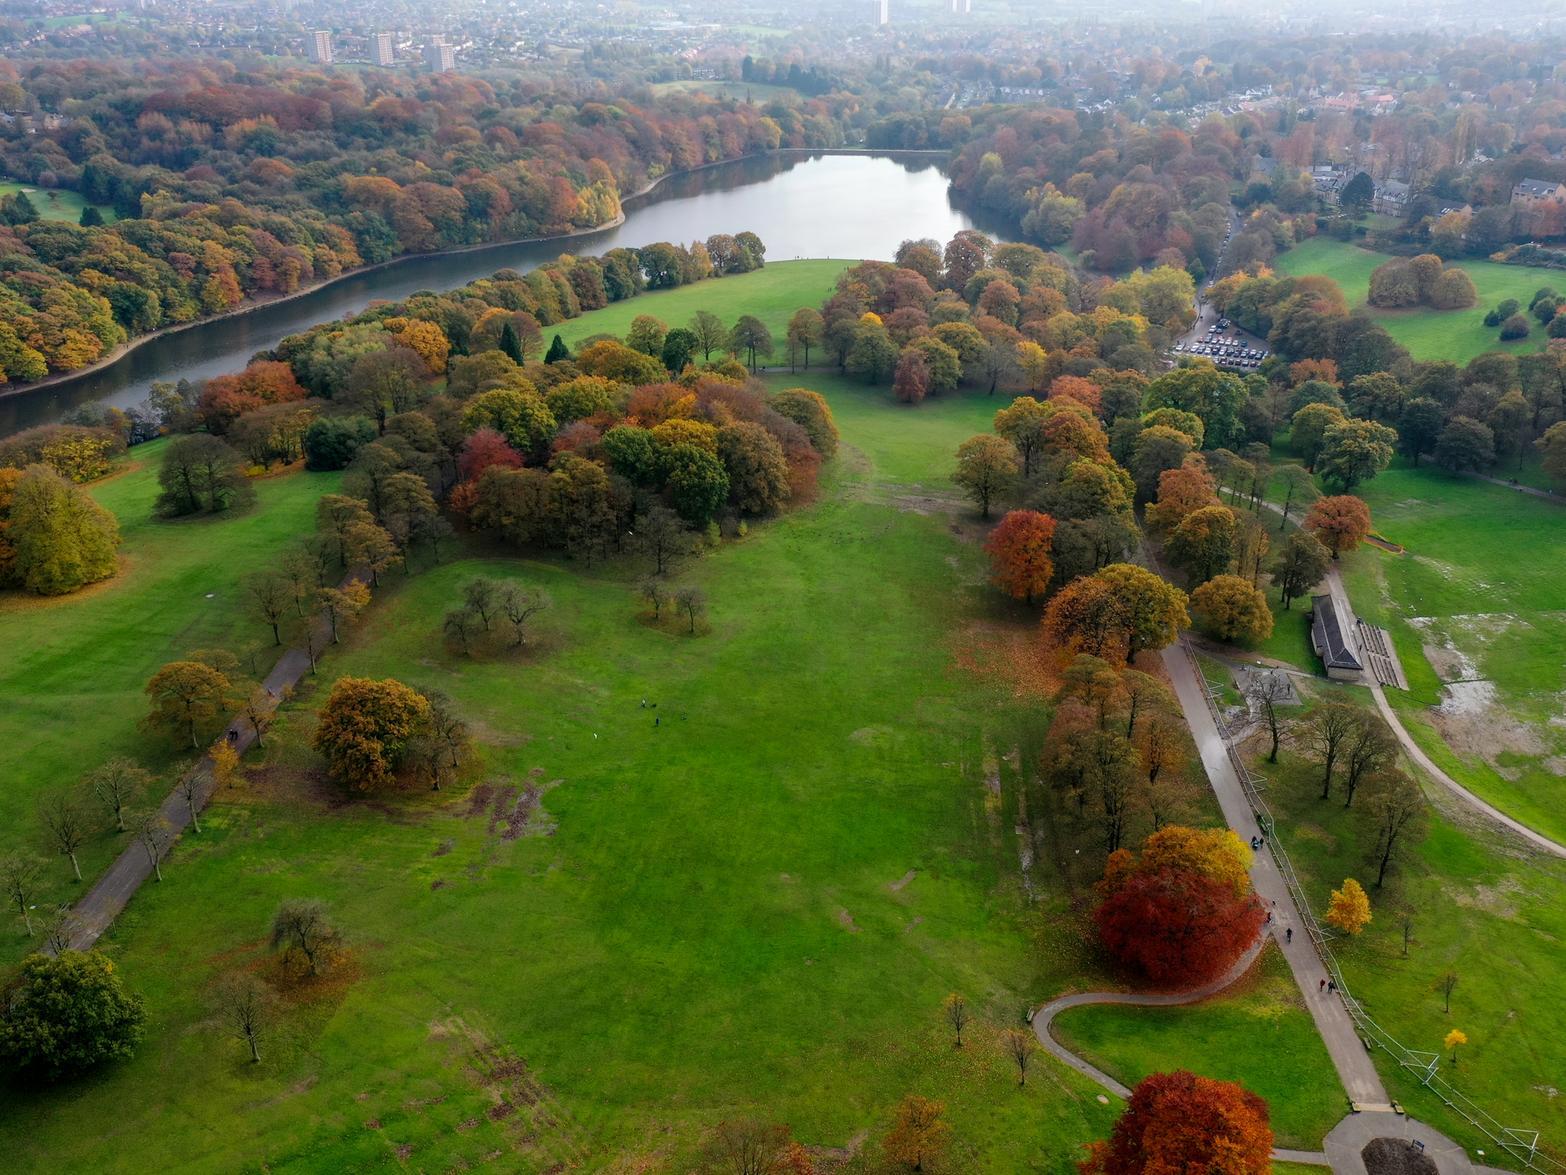 Roundhay Park from the air